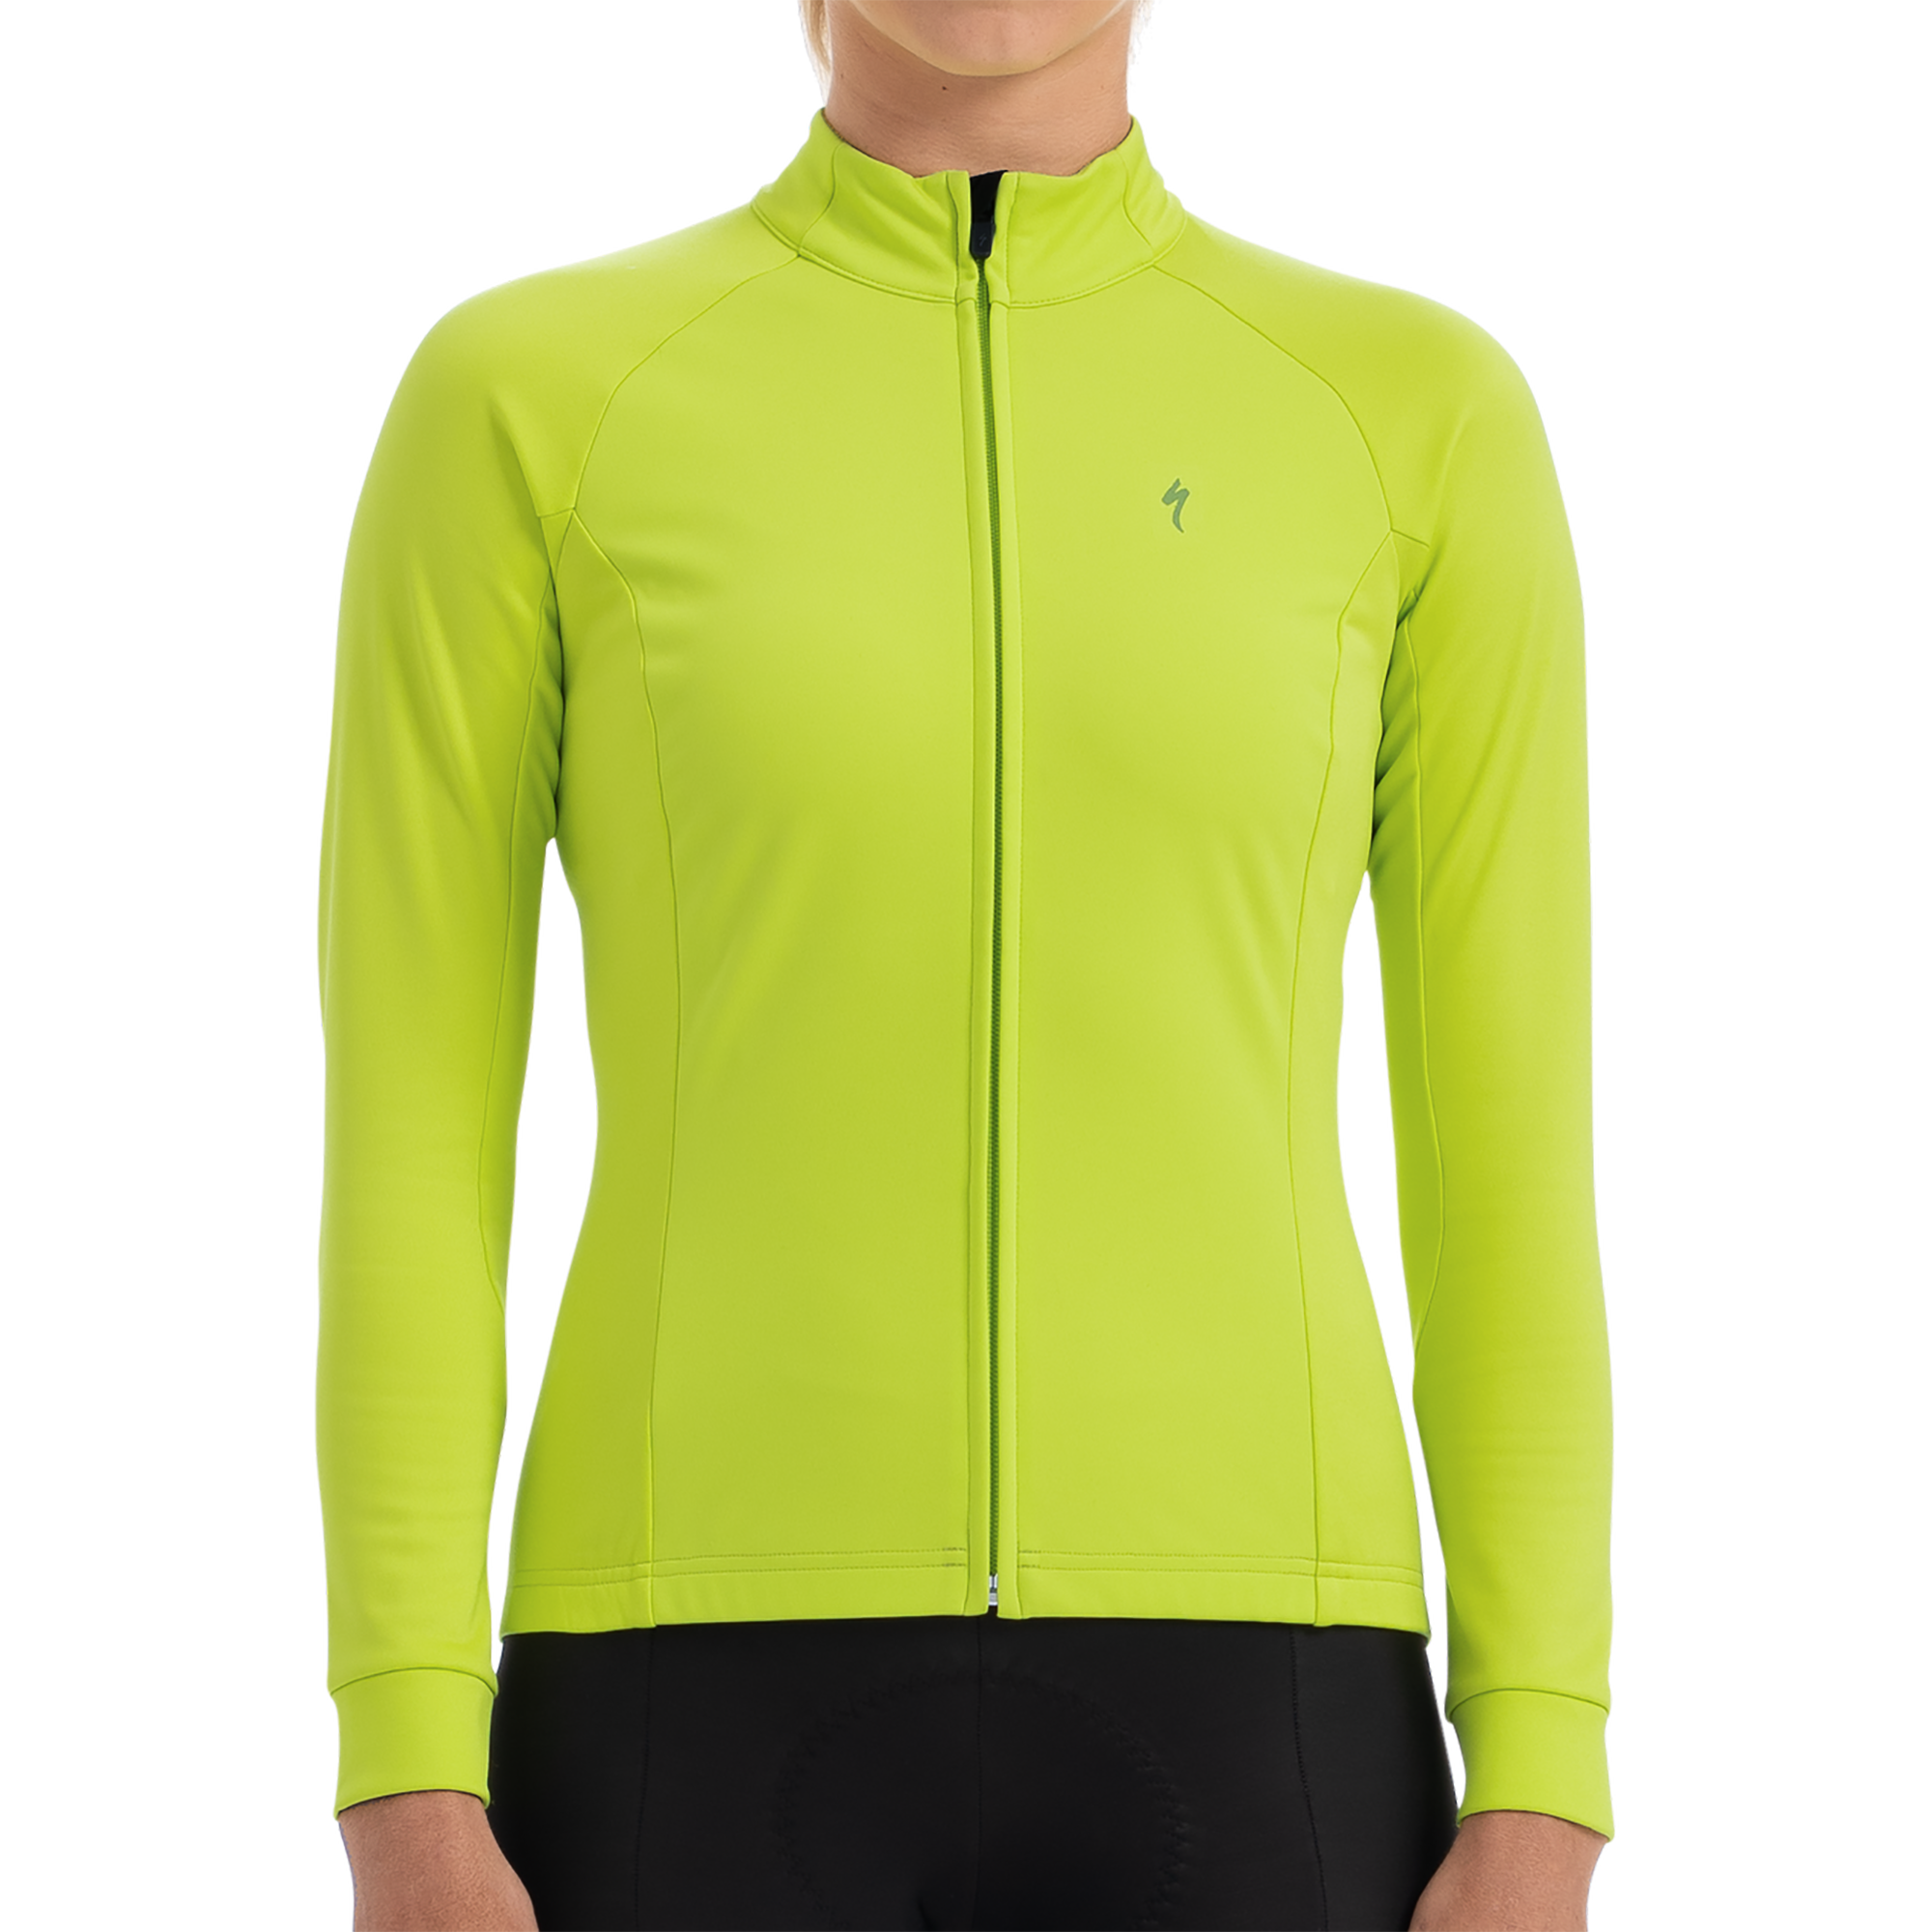 Women's HyprViz Therminal™ Wind Long Sleeve Jersey